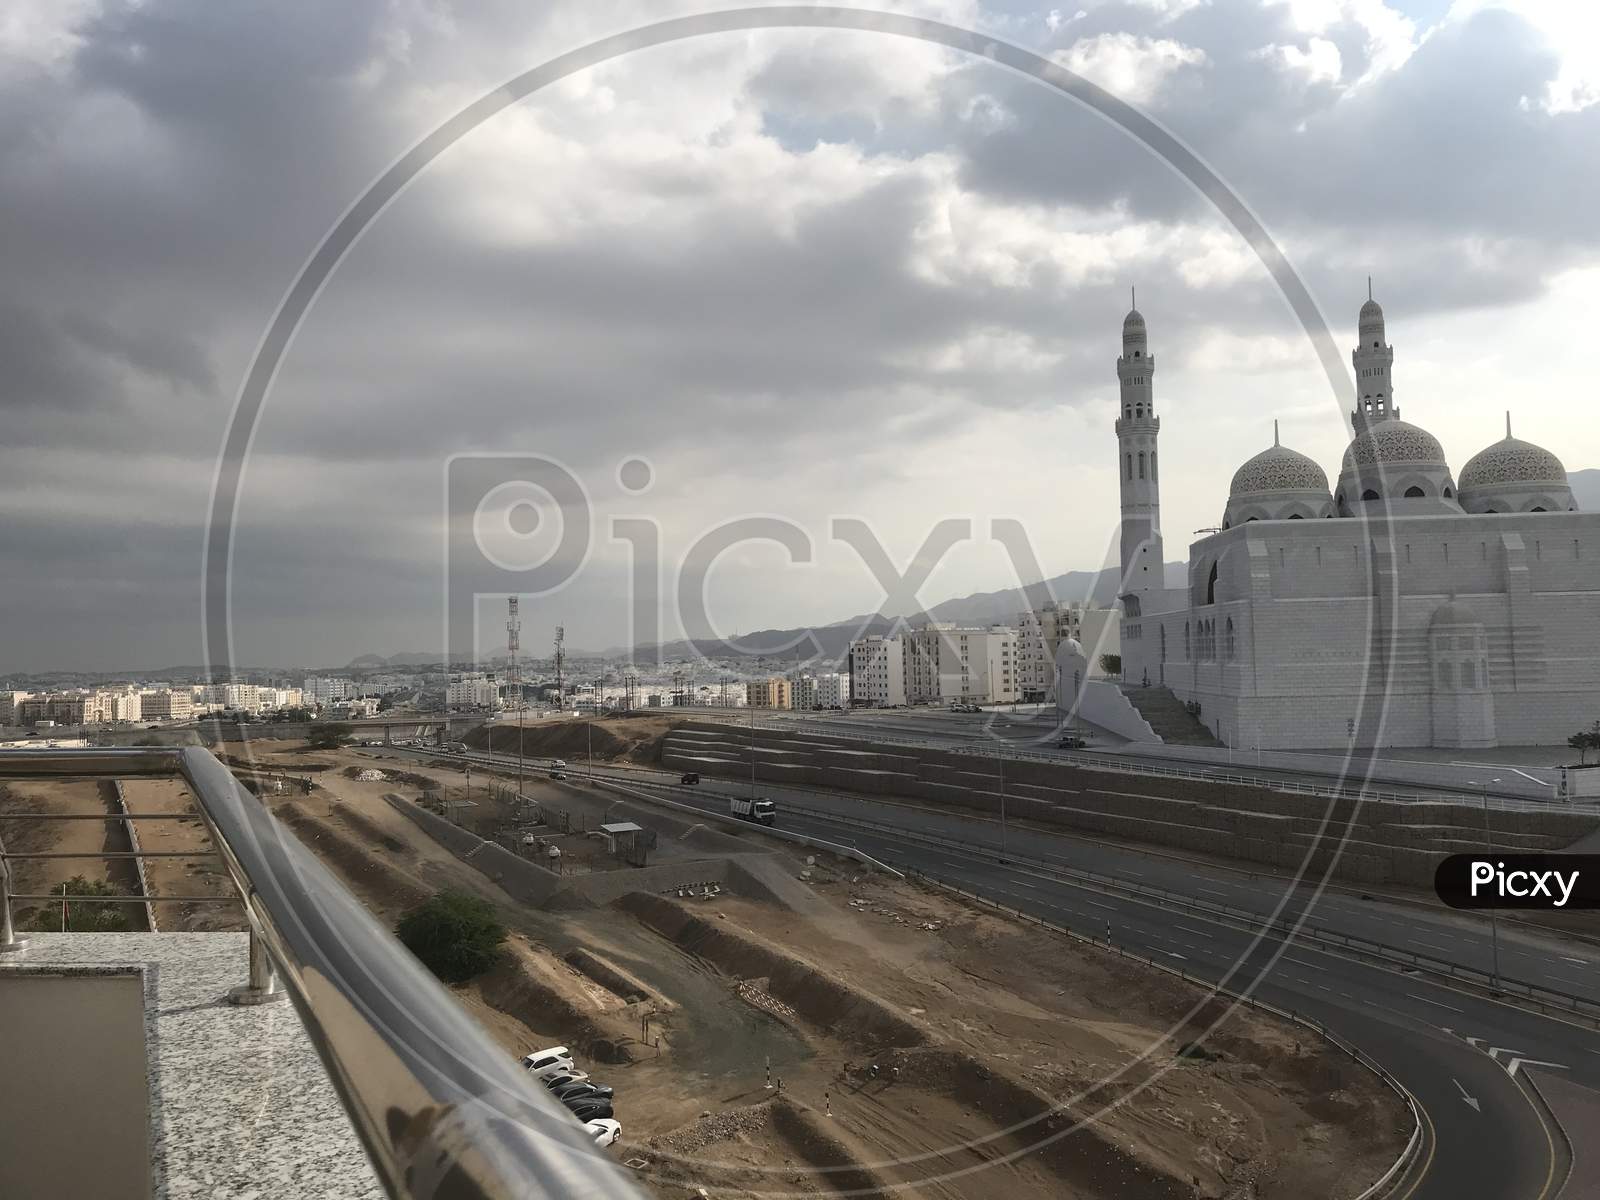 Al Islamic Mosque Picture With The Background Of Muscat City With Cloudy Sky And Such A Beautiful View Of Cityscape